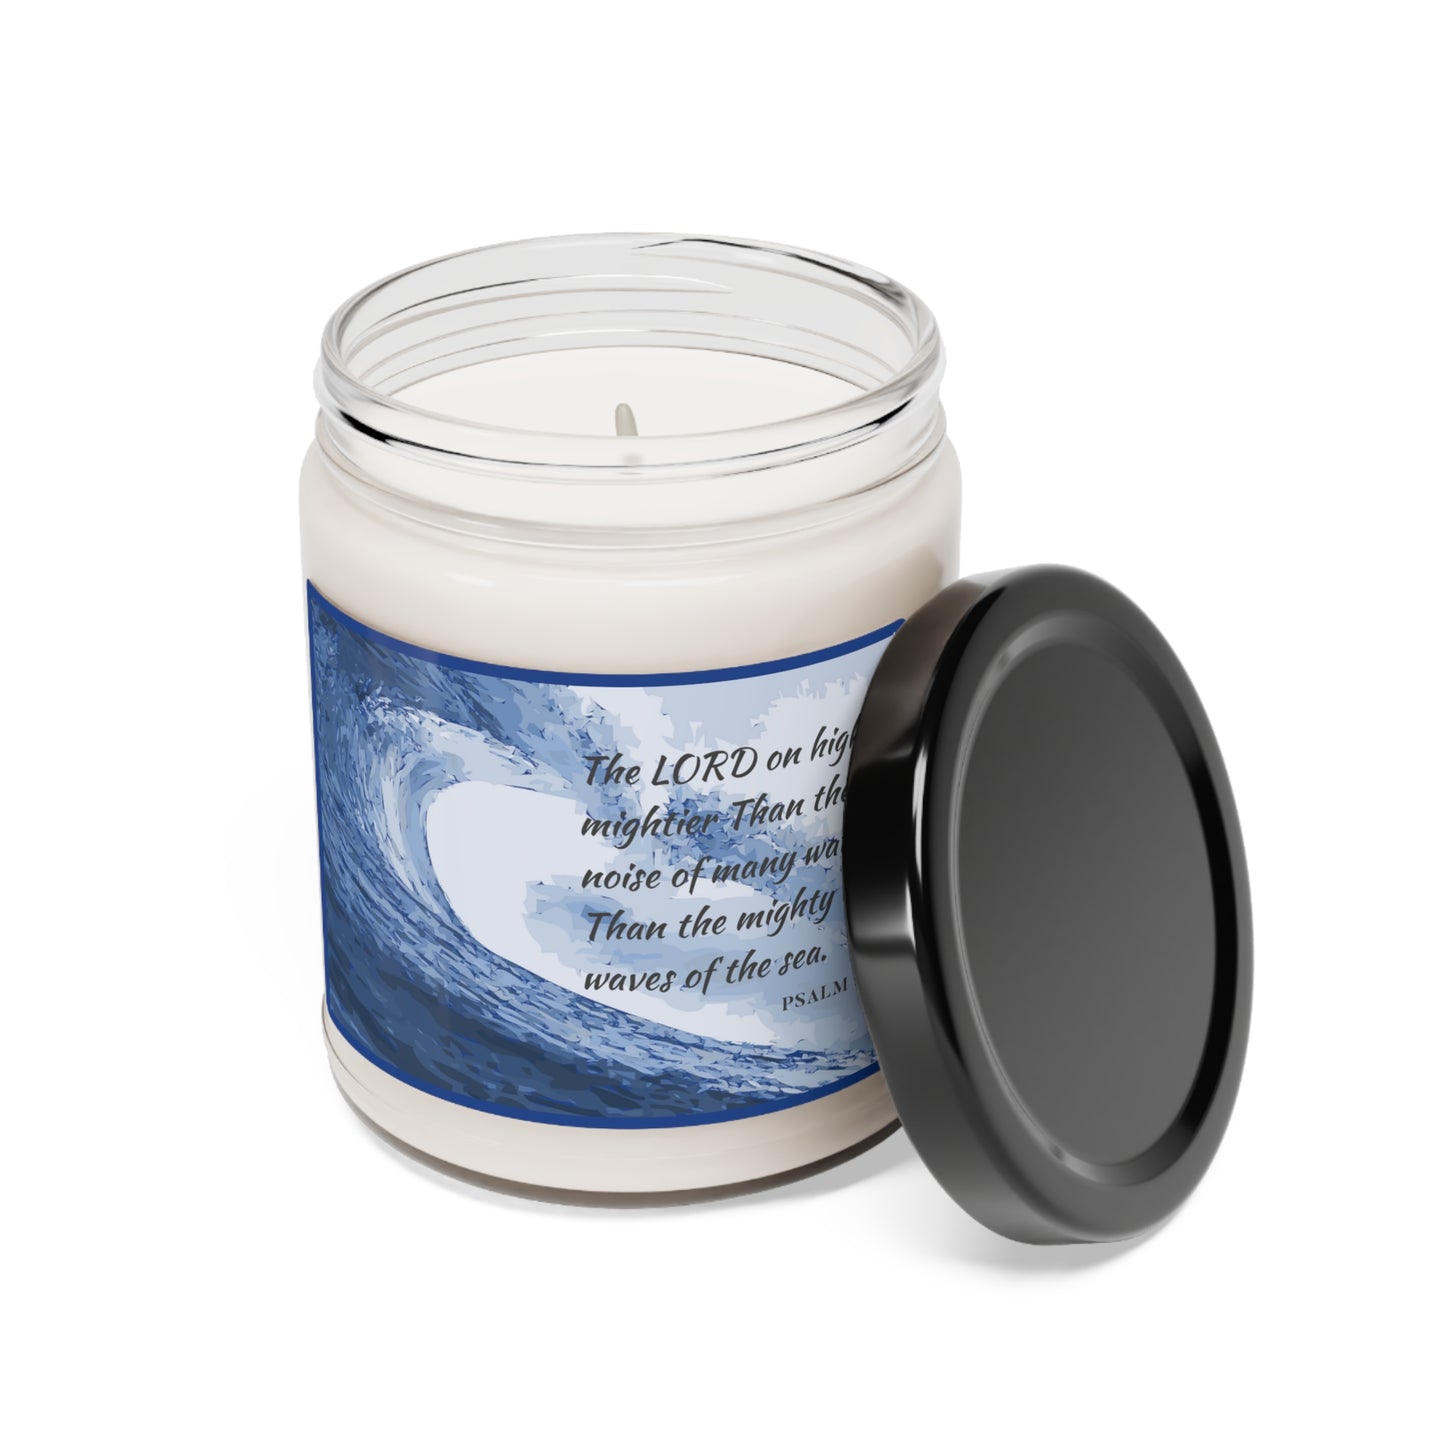 Mightier Than The Waves Sea Salt Aromatherapy Soy Candle, 9oz